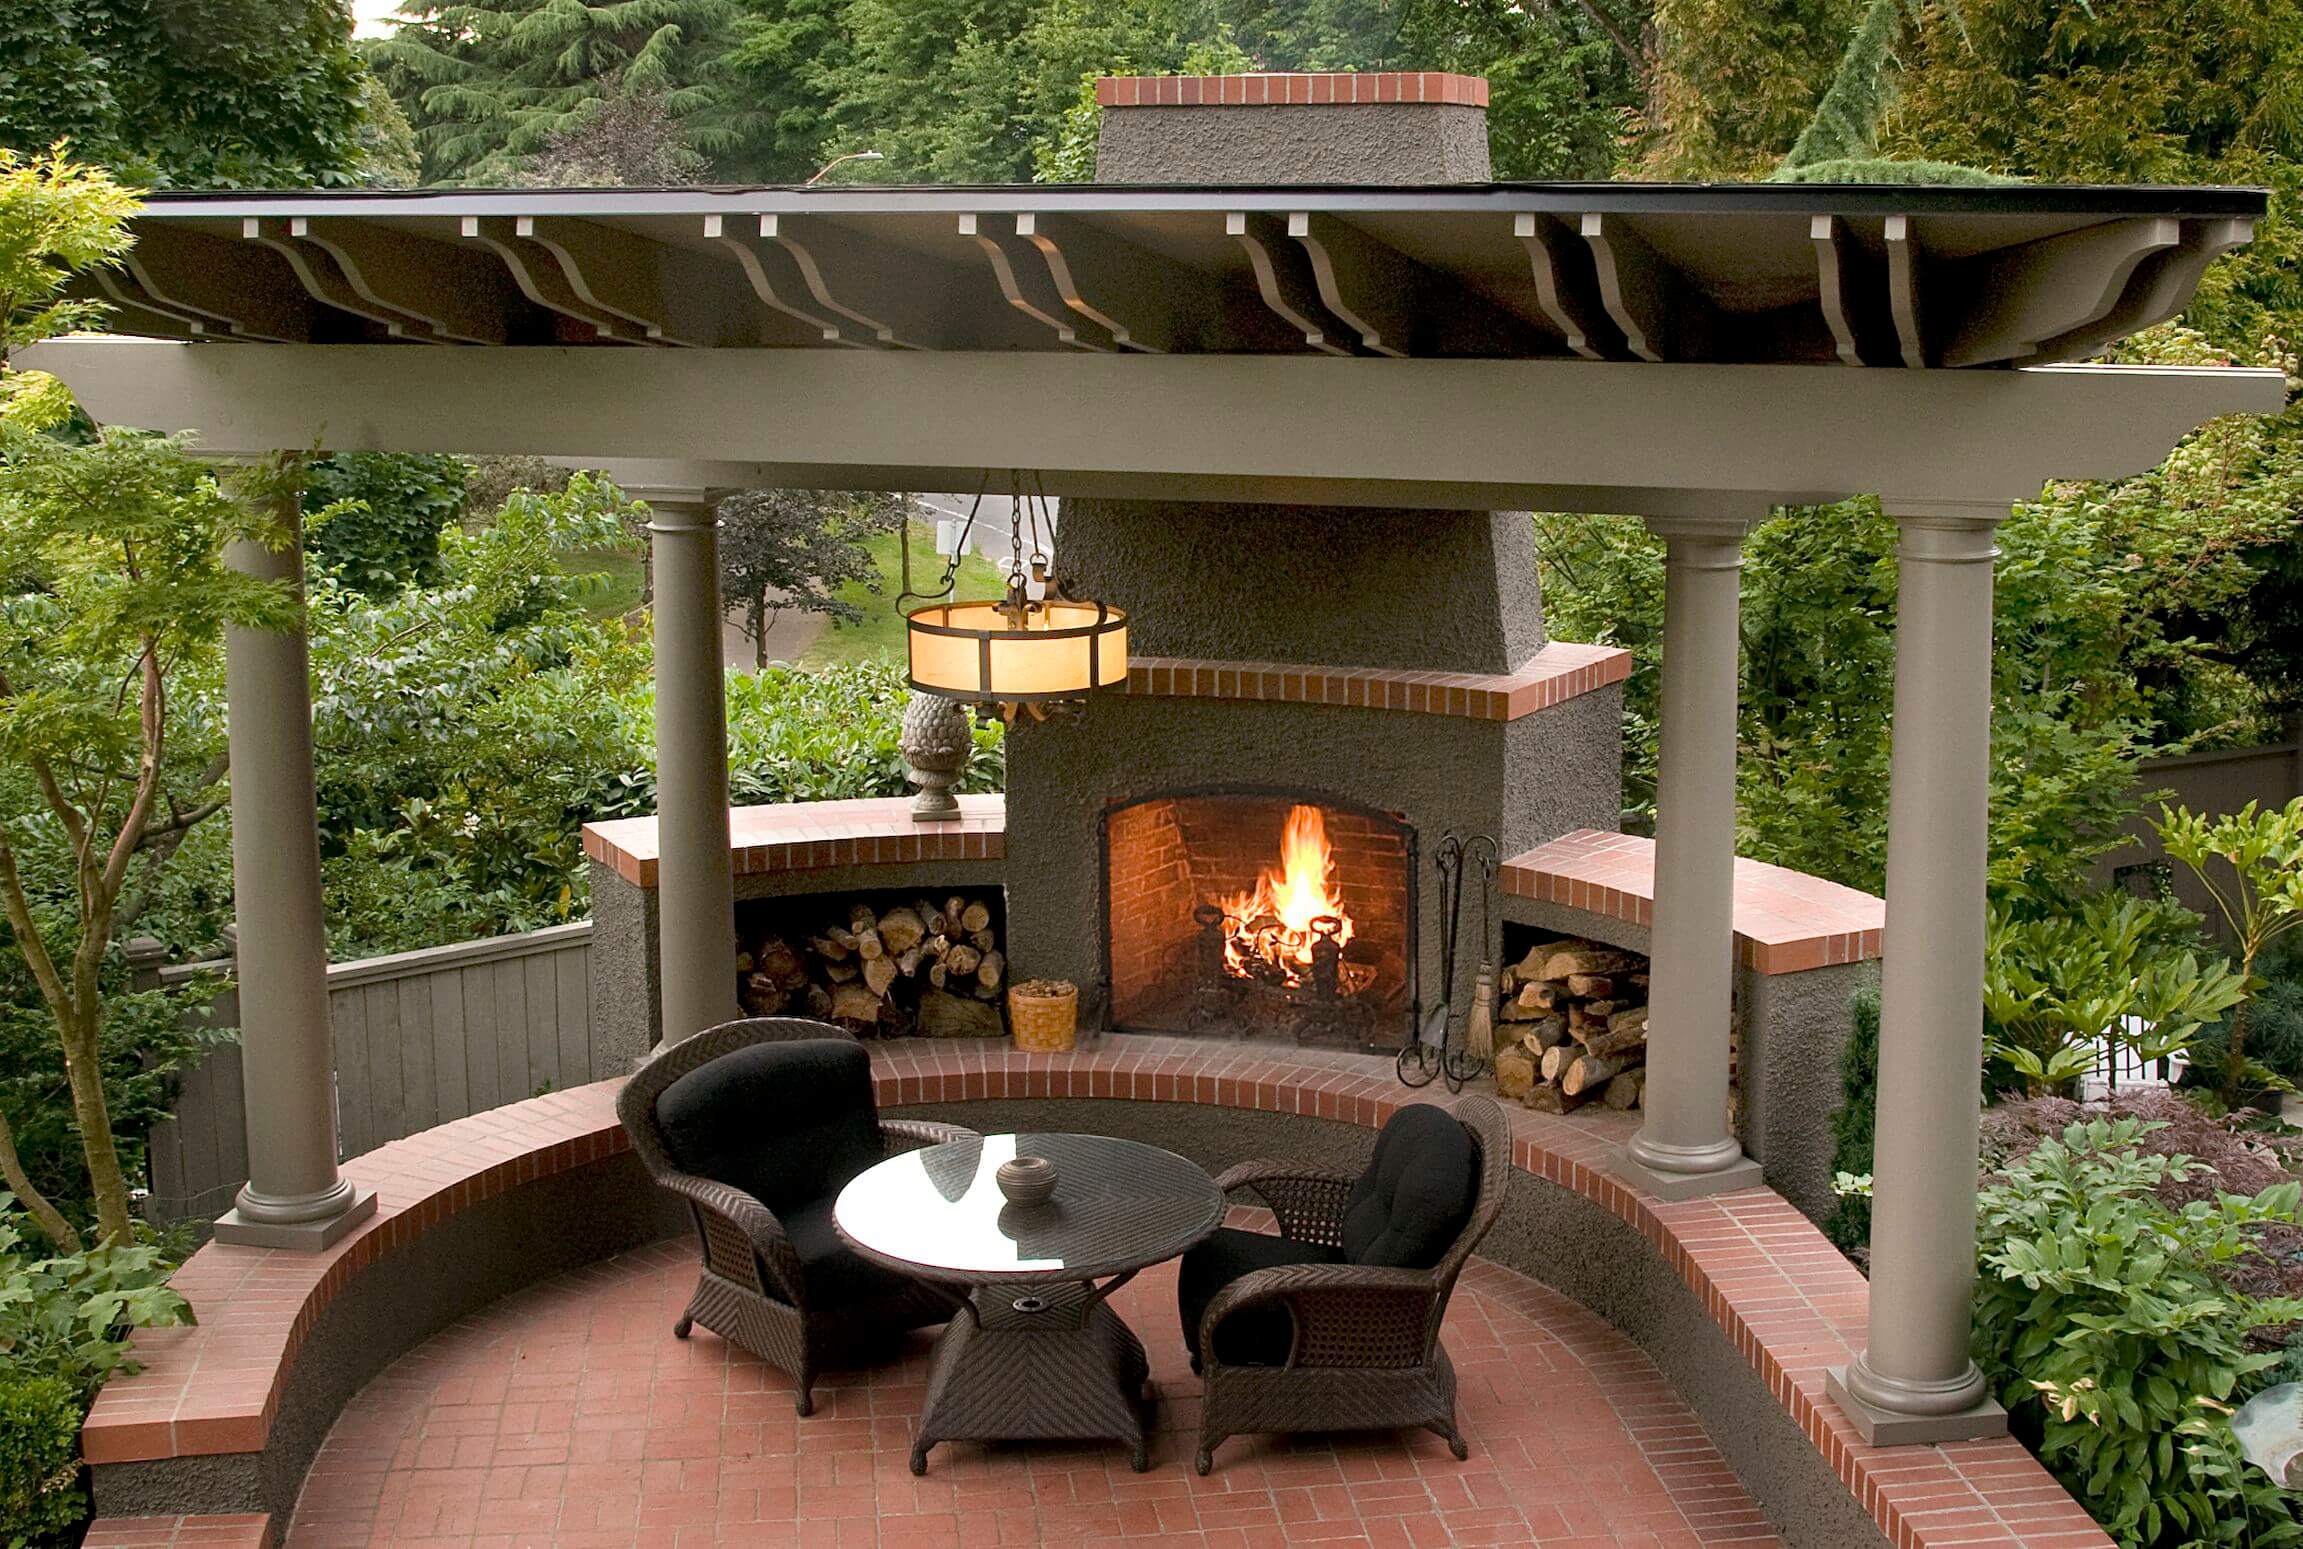 Two outdoor chairs and a table sitting near a lit fireplace.